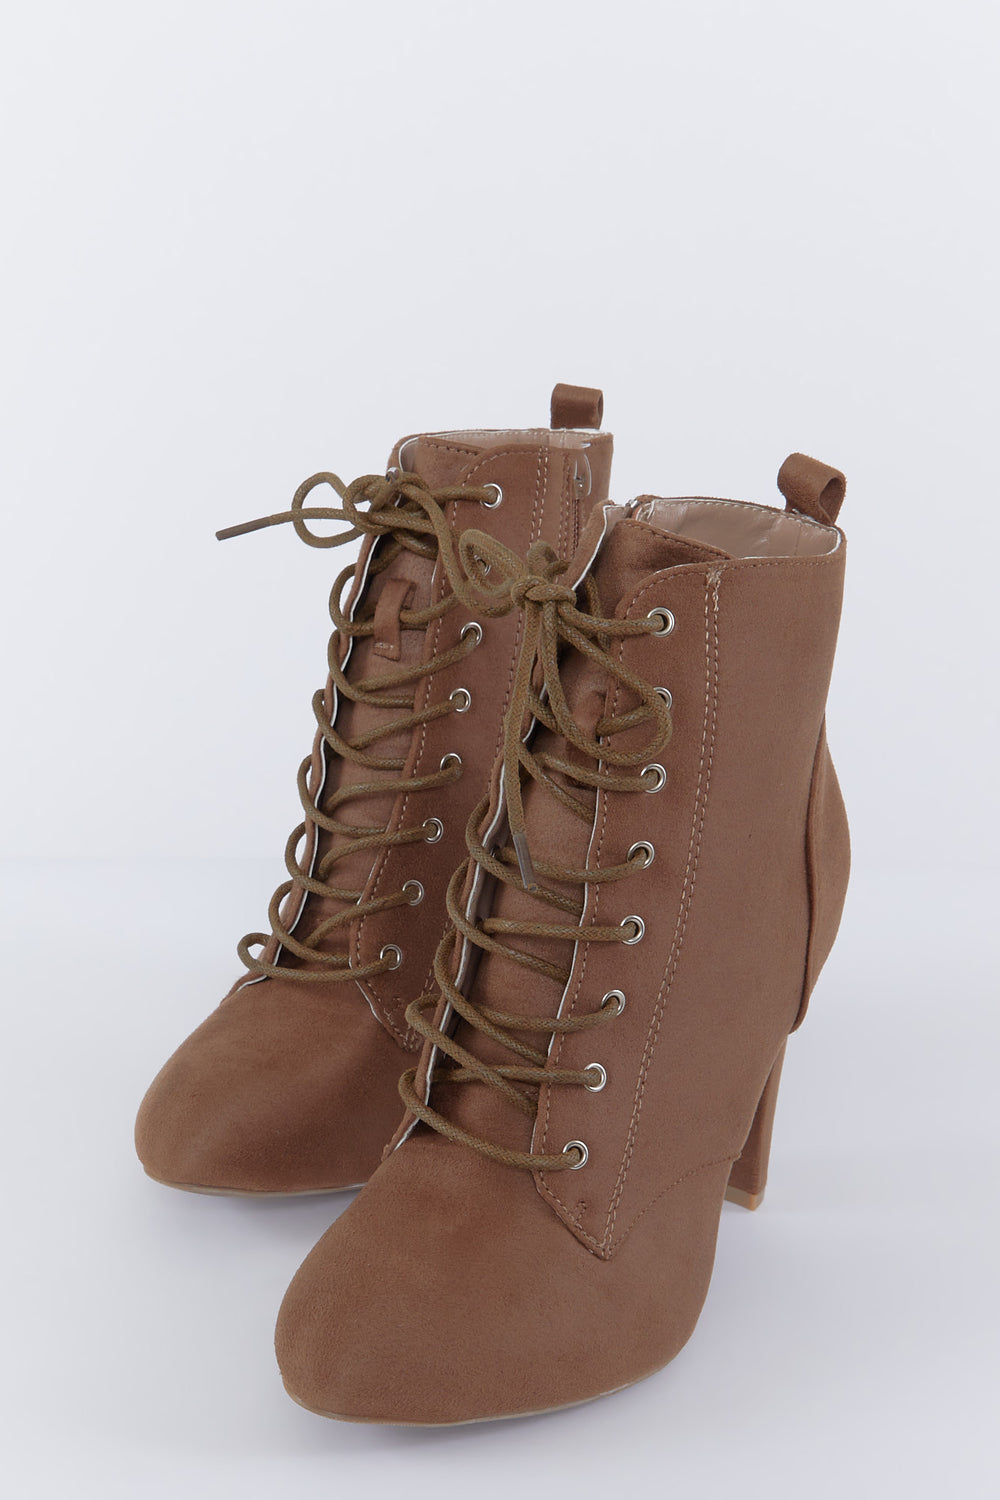 Faux-Suede Lace-Up High Heel Boot Brown